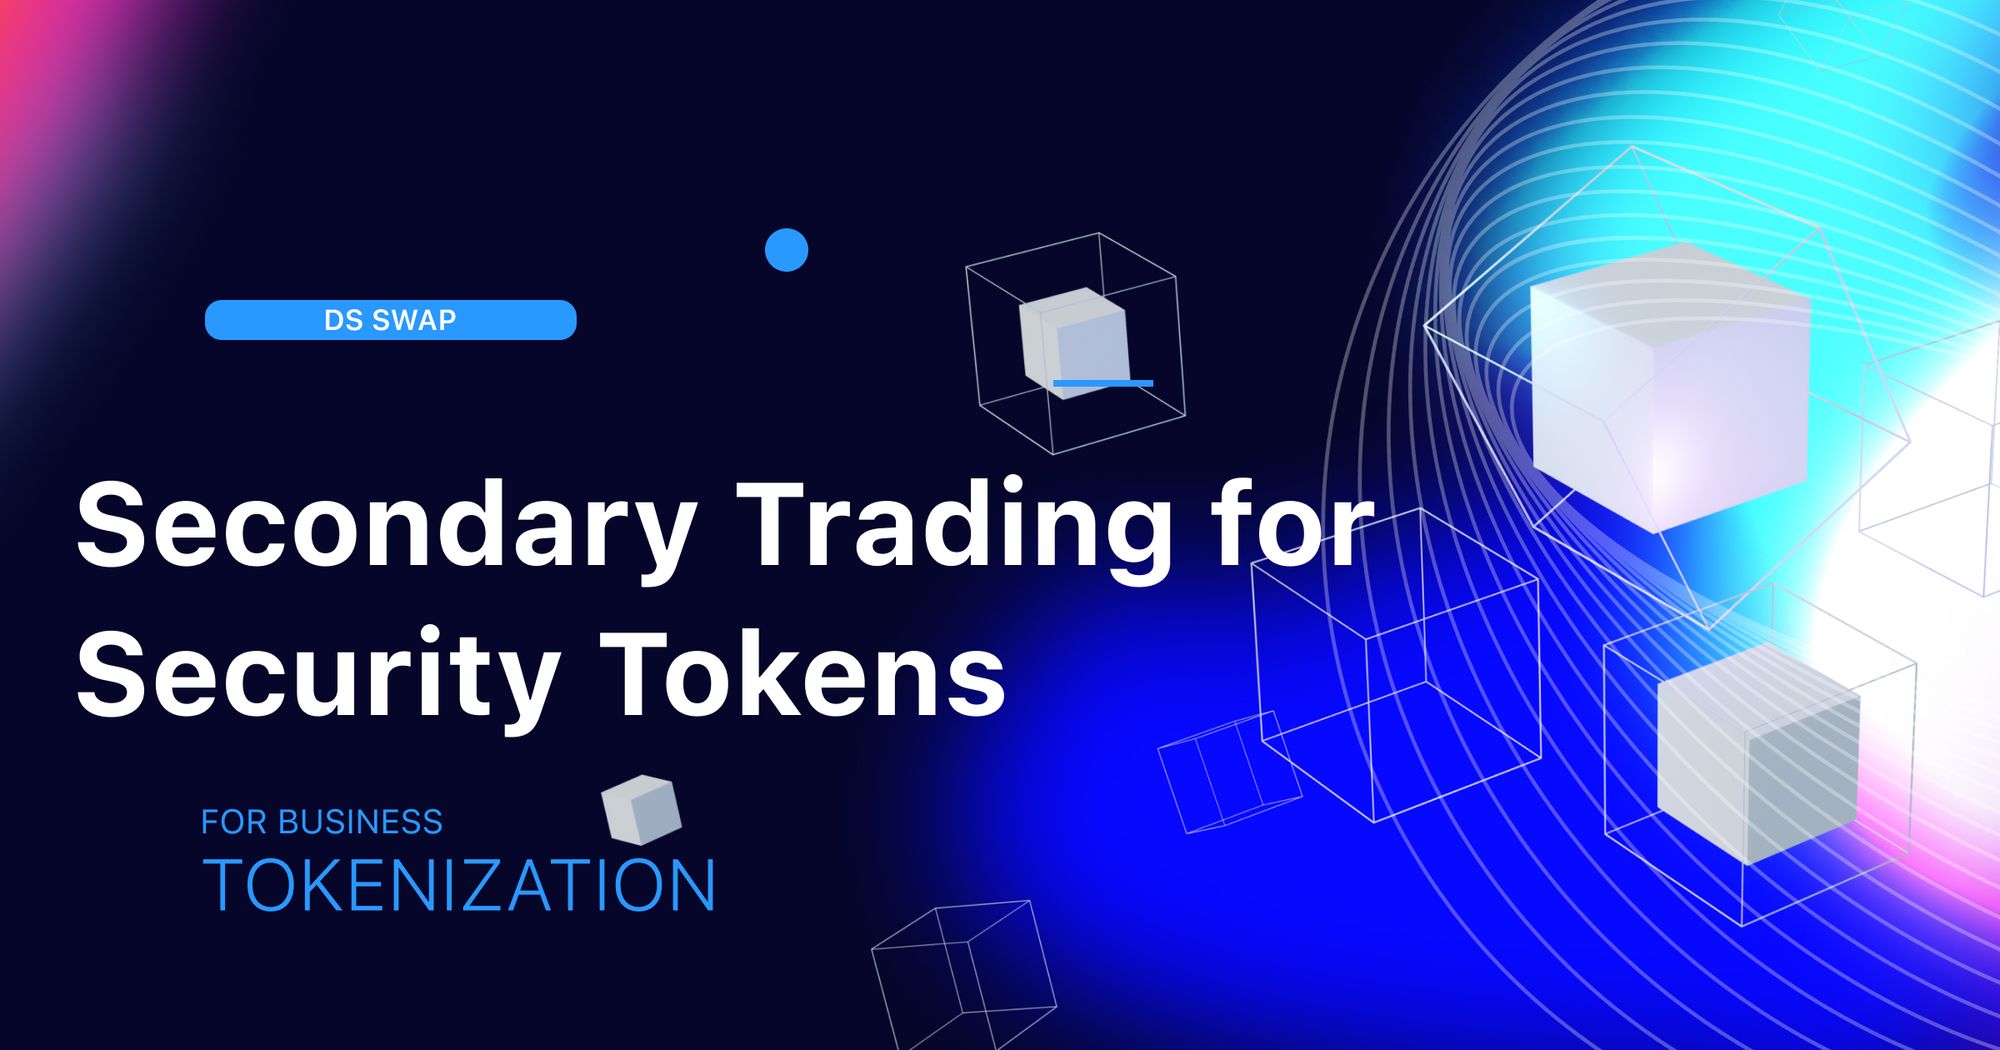 DS Swap. The DeFi Platform unlocks secondary trading for Security Tokens.